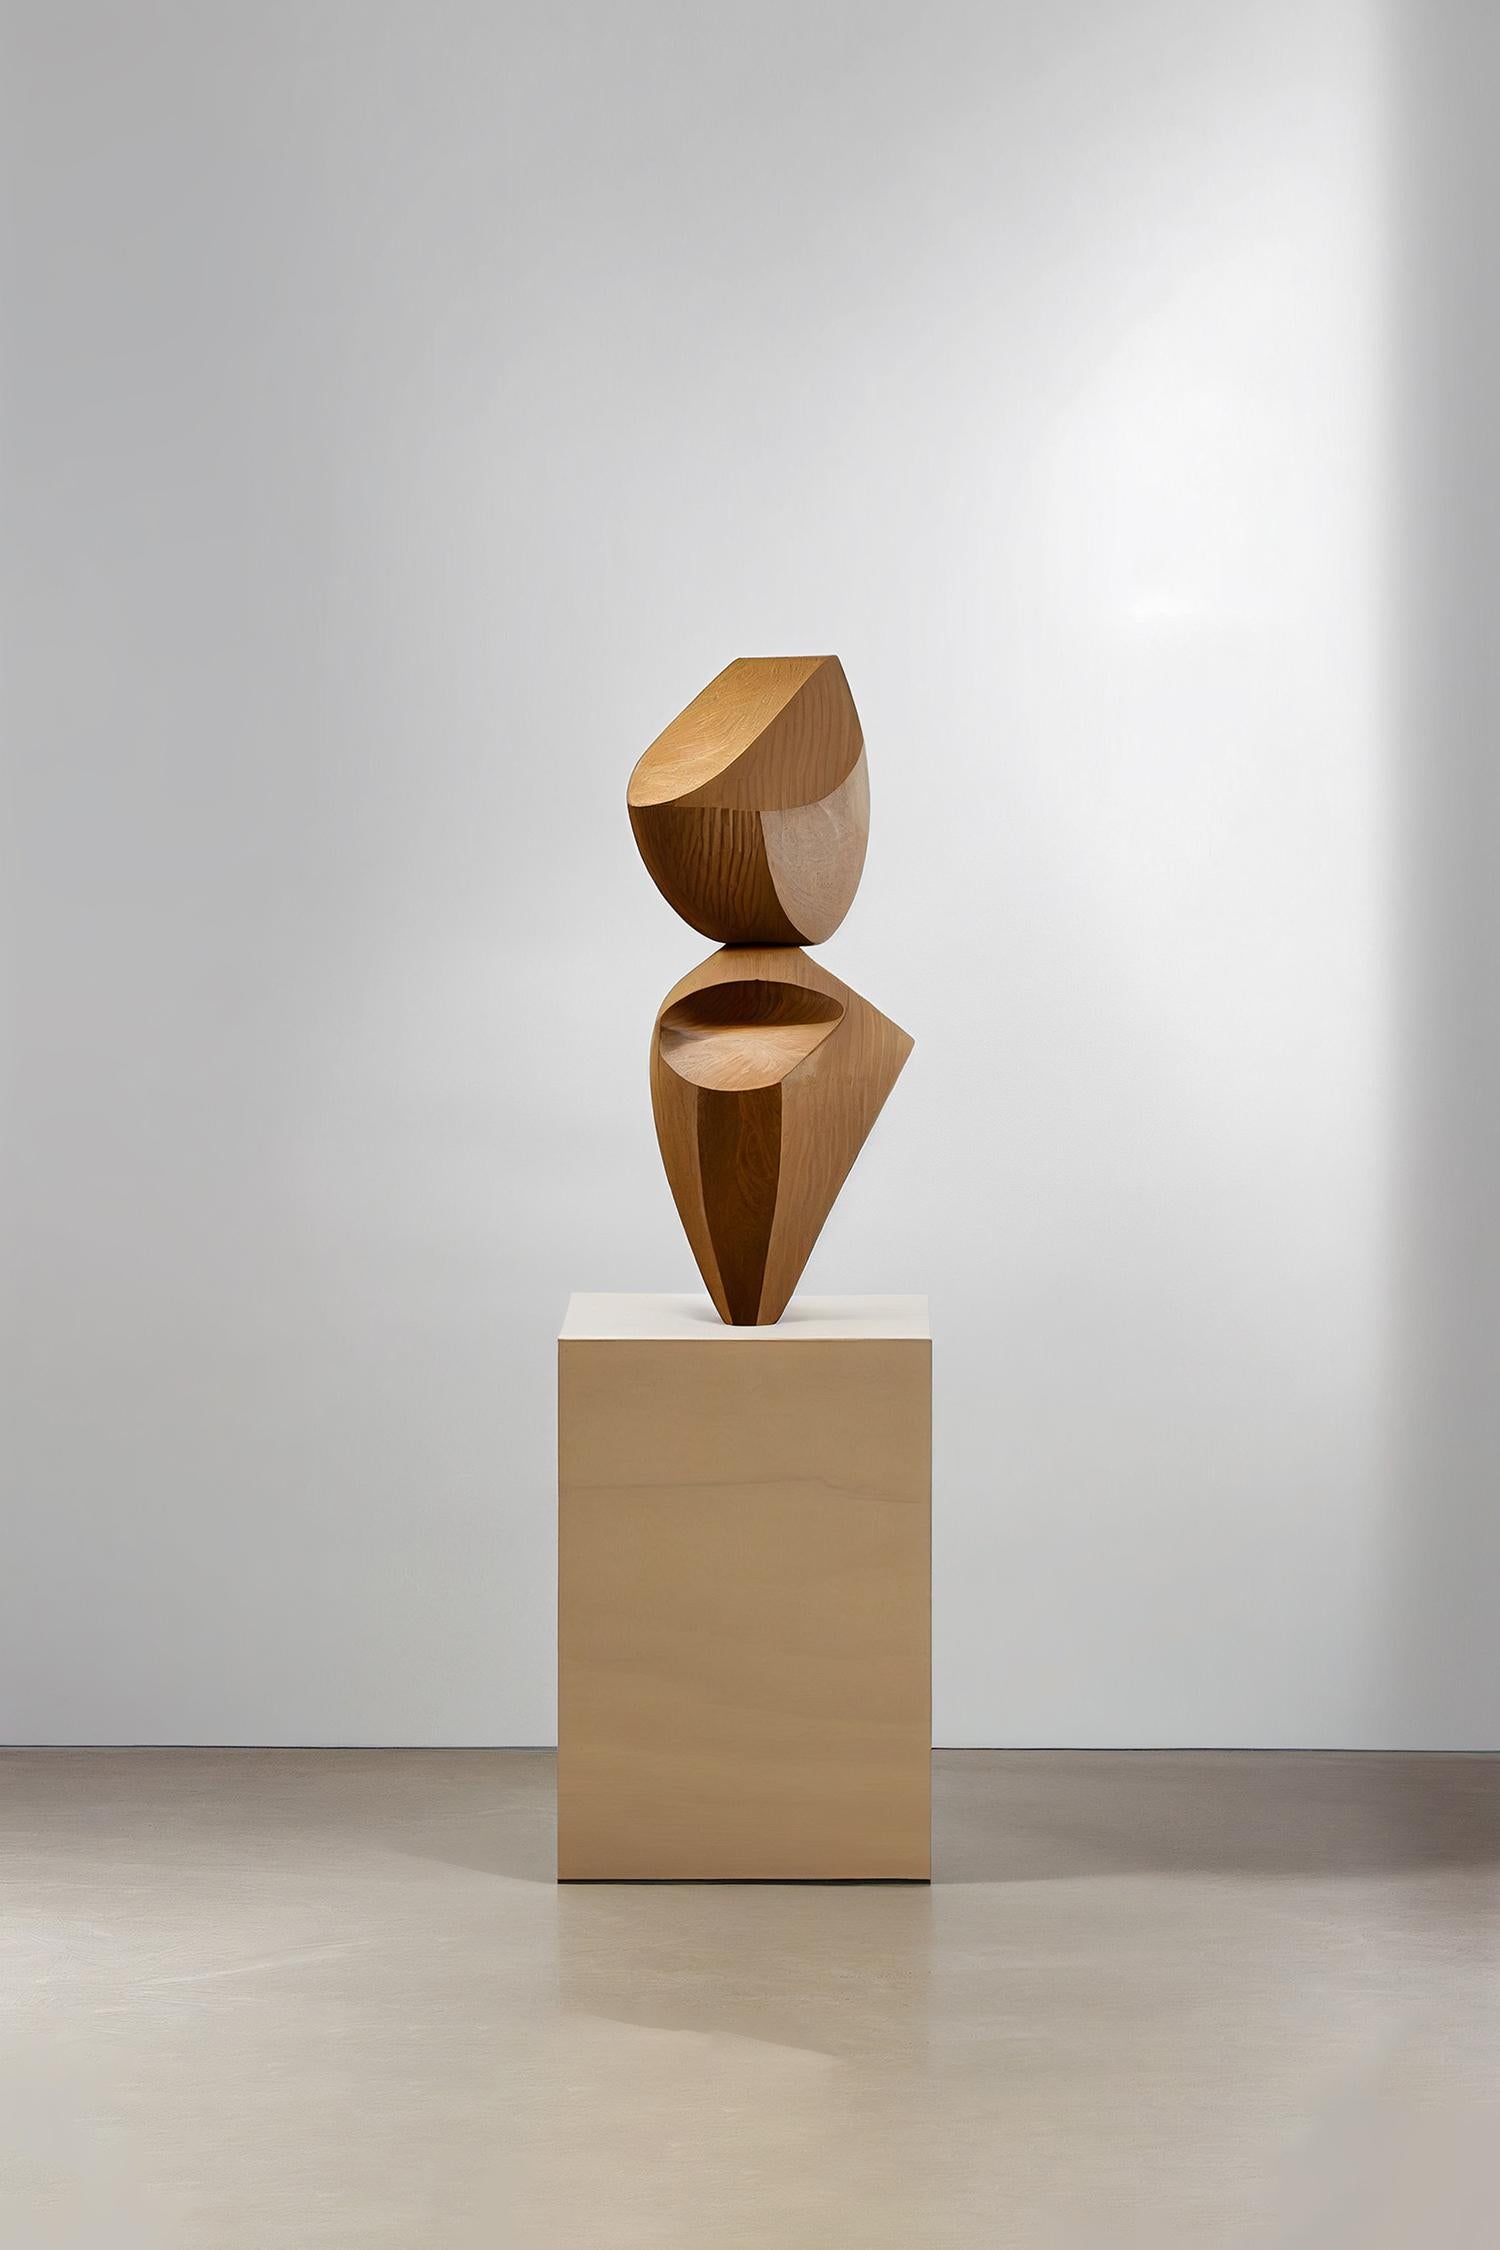 This monolithic sculpture, designed by the talented Artist Joel Escalona, is a towering example of beauty in craftsmanship. Hand and digital machine made; the standing sculpture stands tall as a monument to the skill of the artist. The wood carved